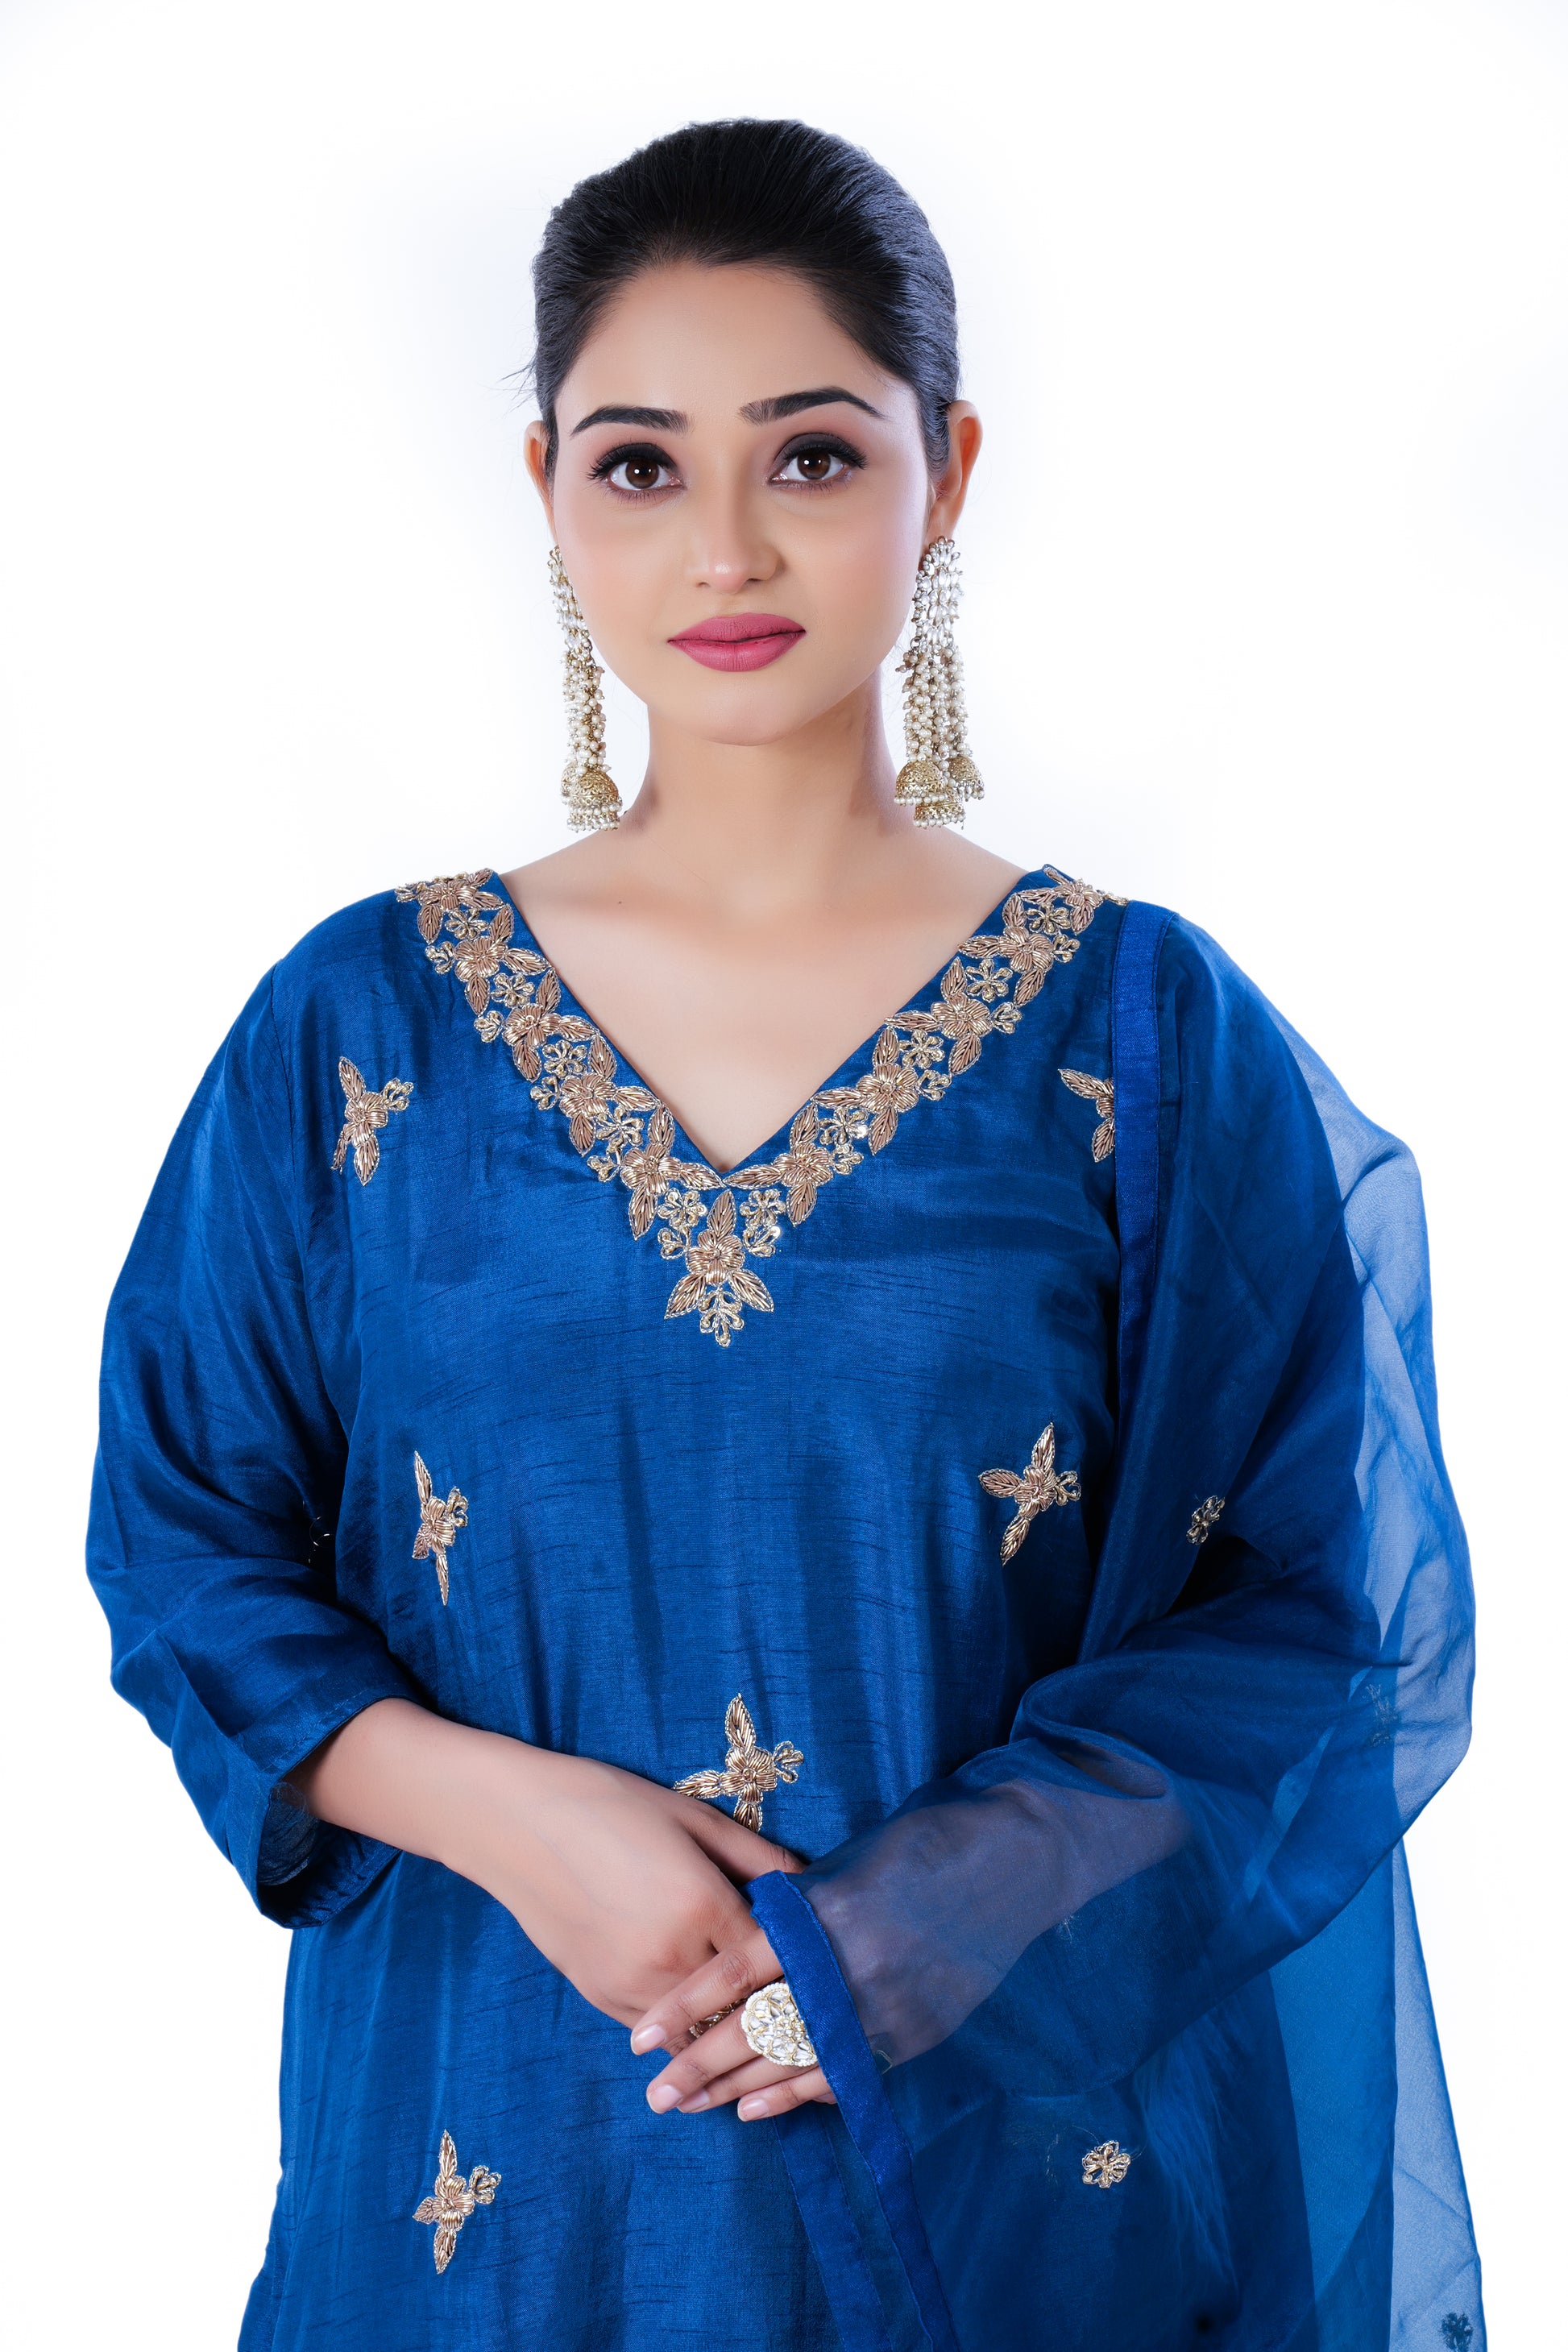 Straight Kurta Set with Organza Dupatta is made from luxurious Dola Silk and Zardozi Embroidery in Teal Colour